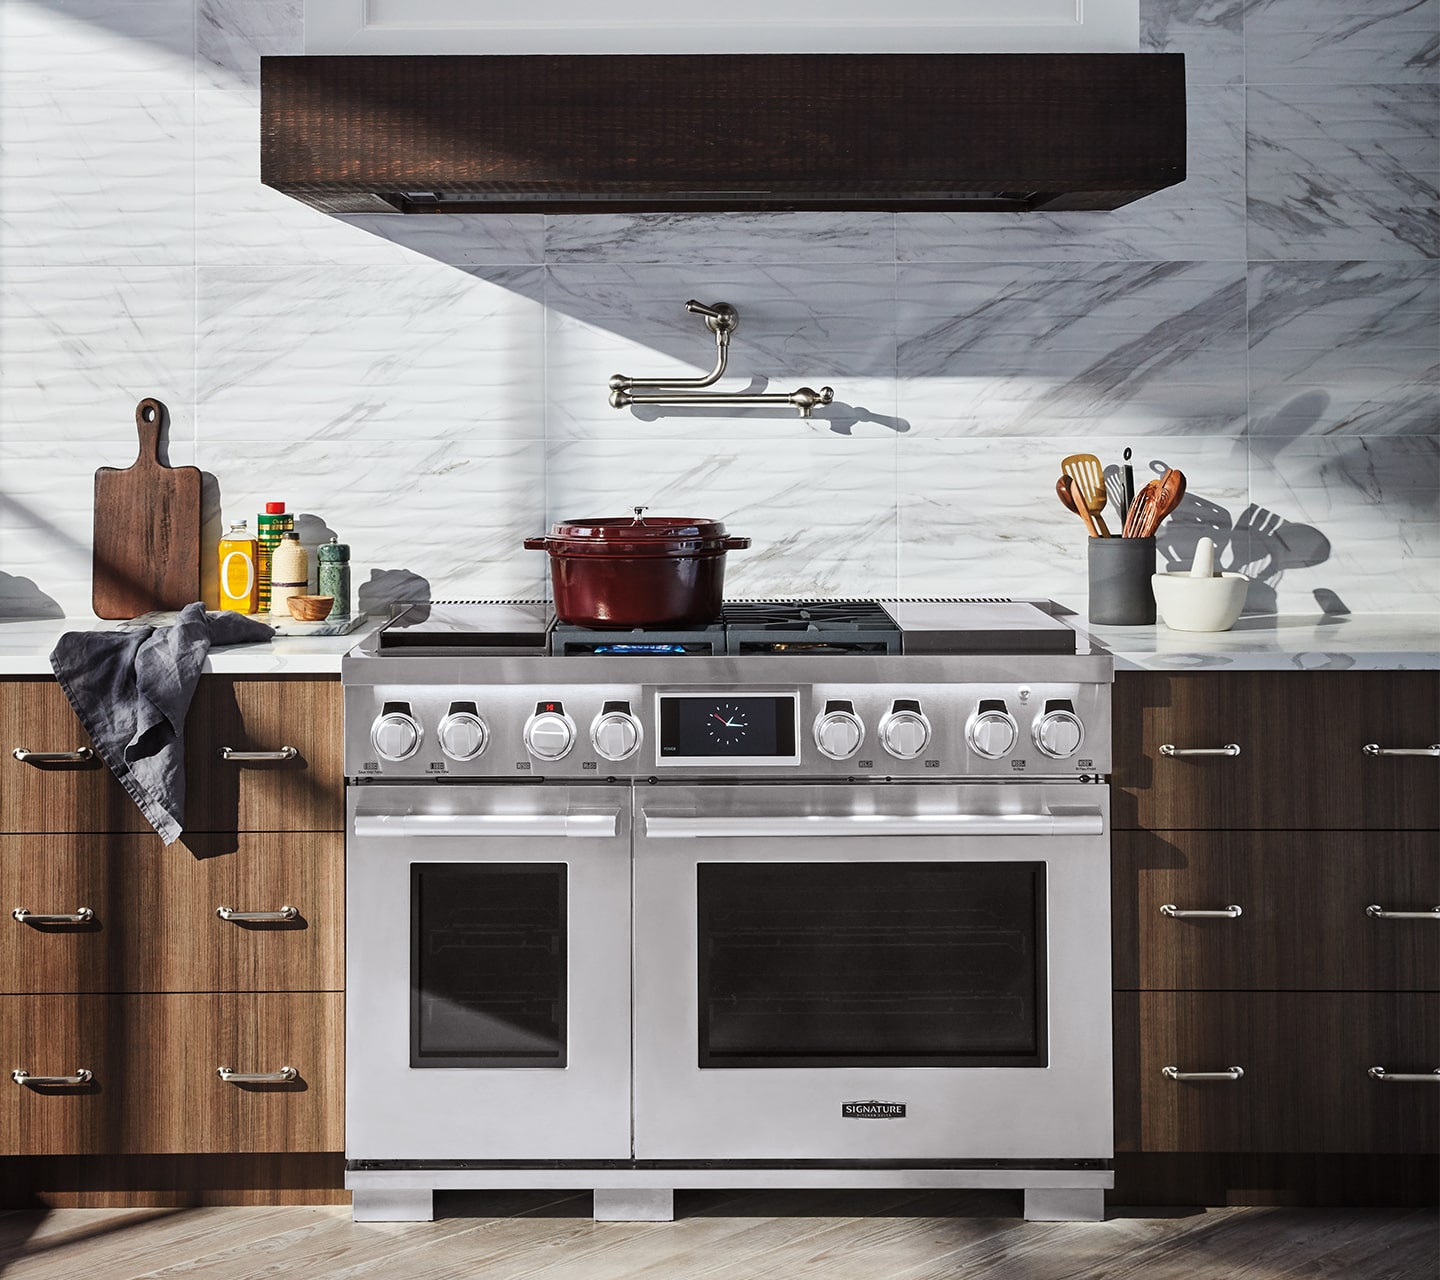 48" Pro Gas Range with sous-vide built-in from Signature Kitchen Suite